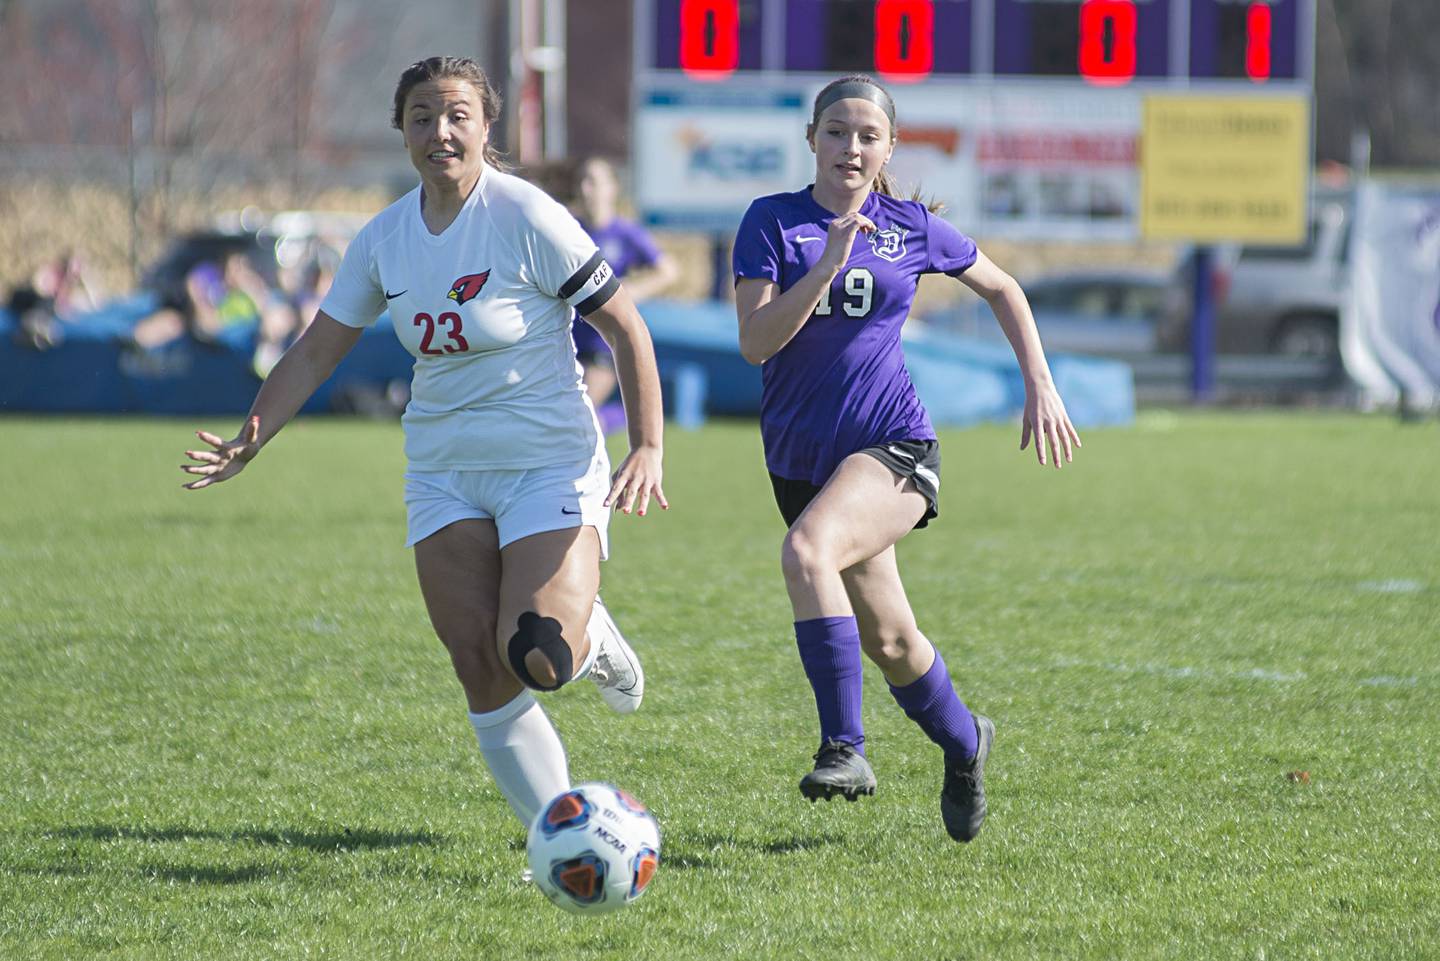 Arielle Rockwood of Dixon and Taylor Davis of Stillman Valley battle for the ball on Thursday, April 21, 2022.